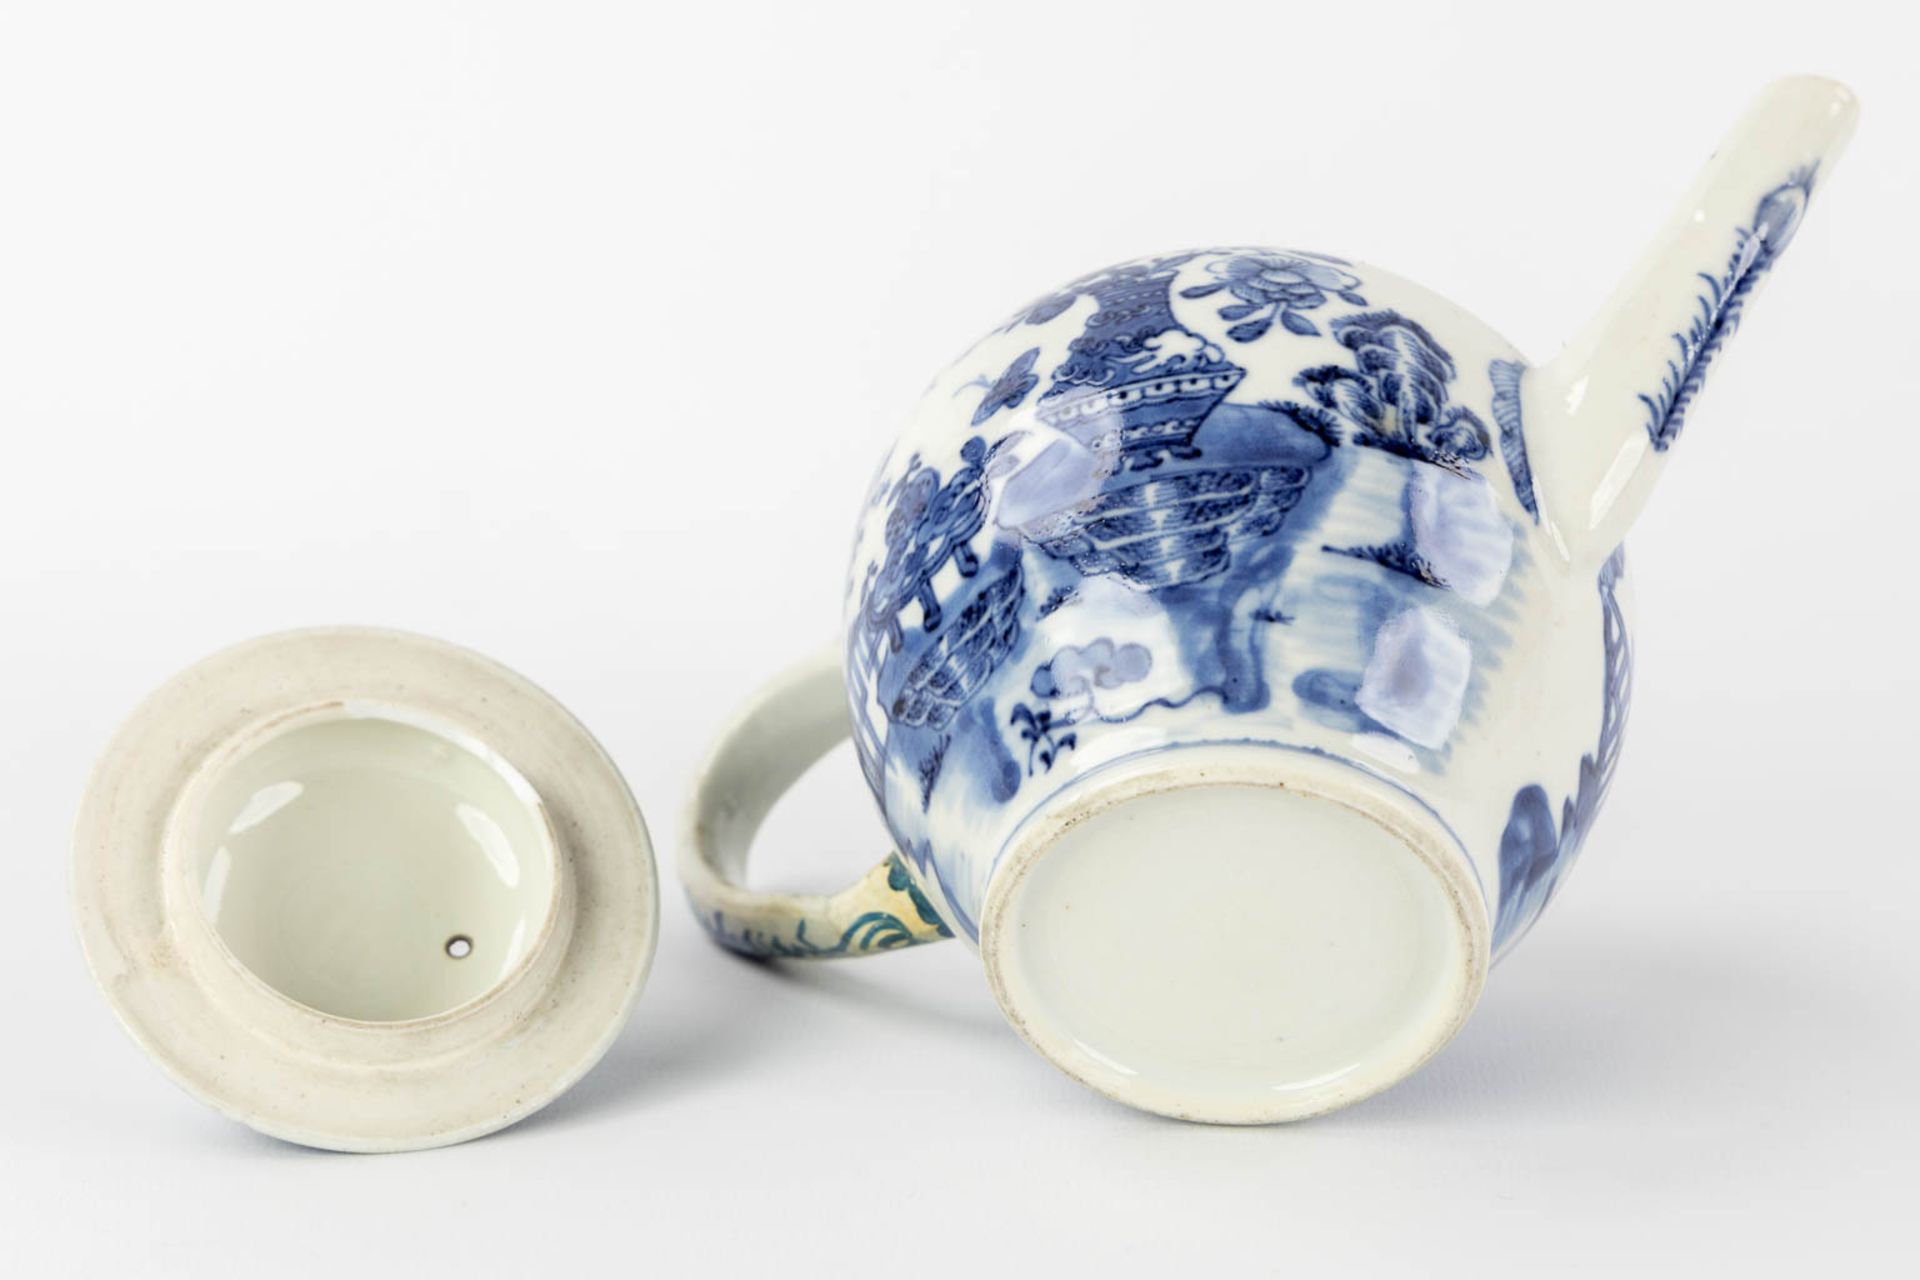 Three Chinese and Japanese teapots, blue-white decor. (W:20 x H:14 cm) - Image 7 of 17